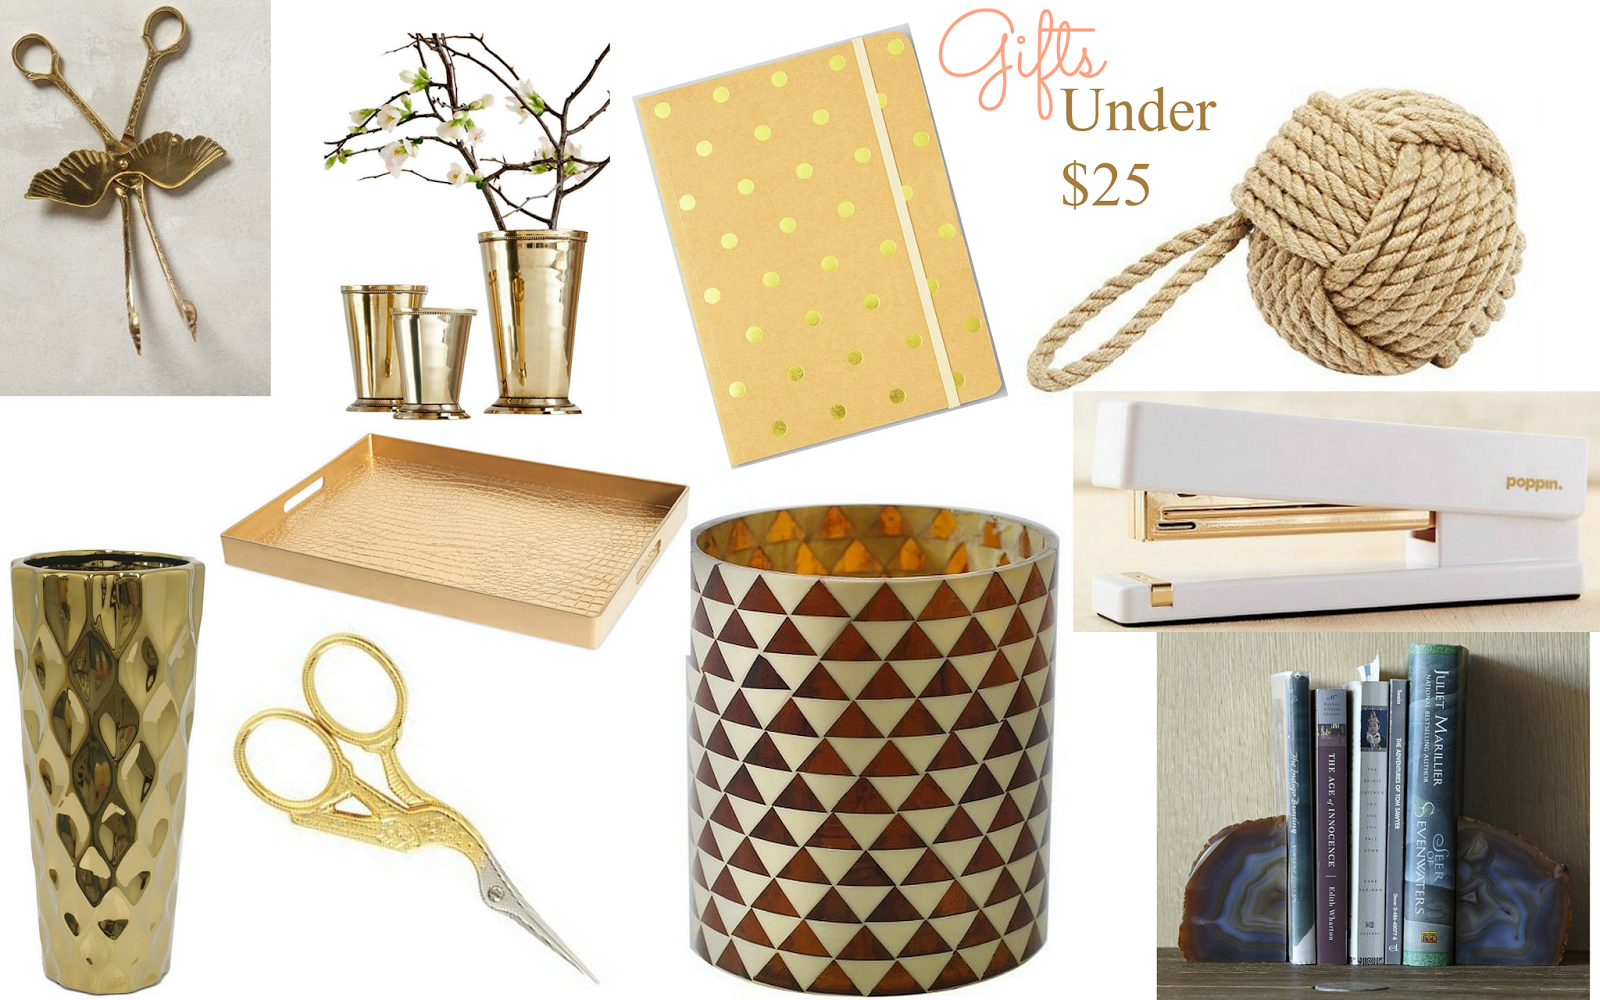 Affordable Gift-giving gifts under $25 for the office+home